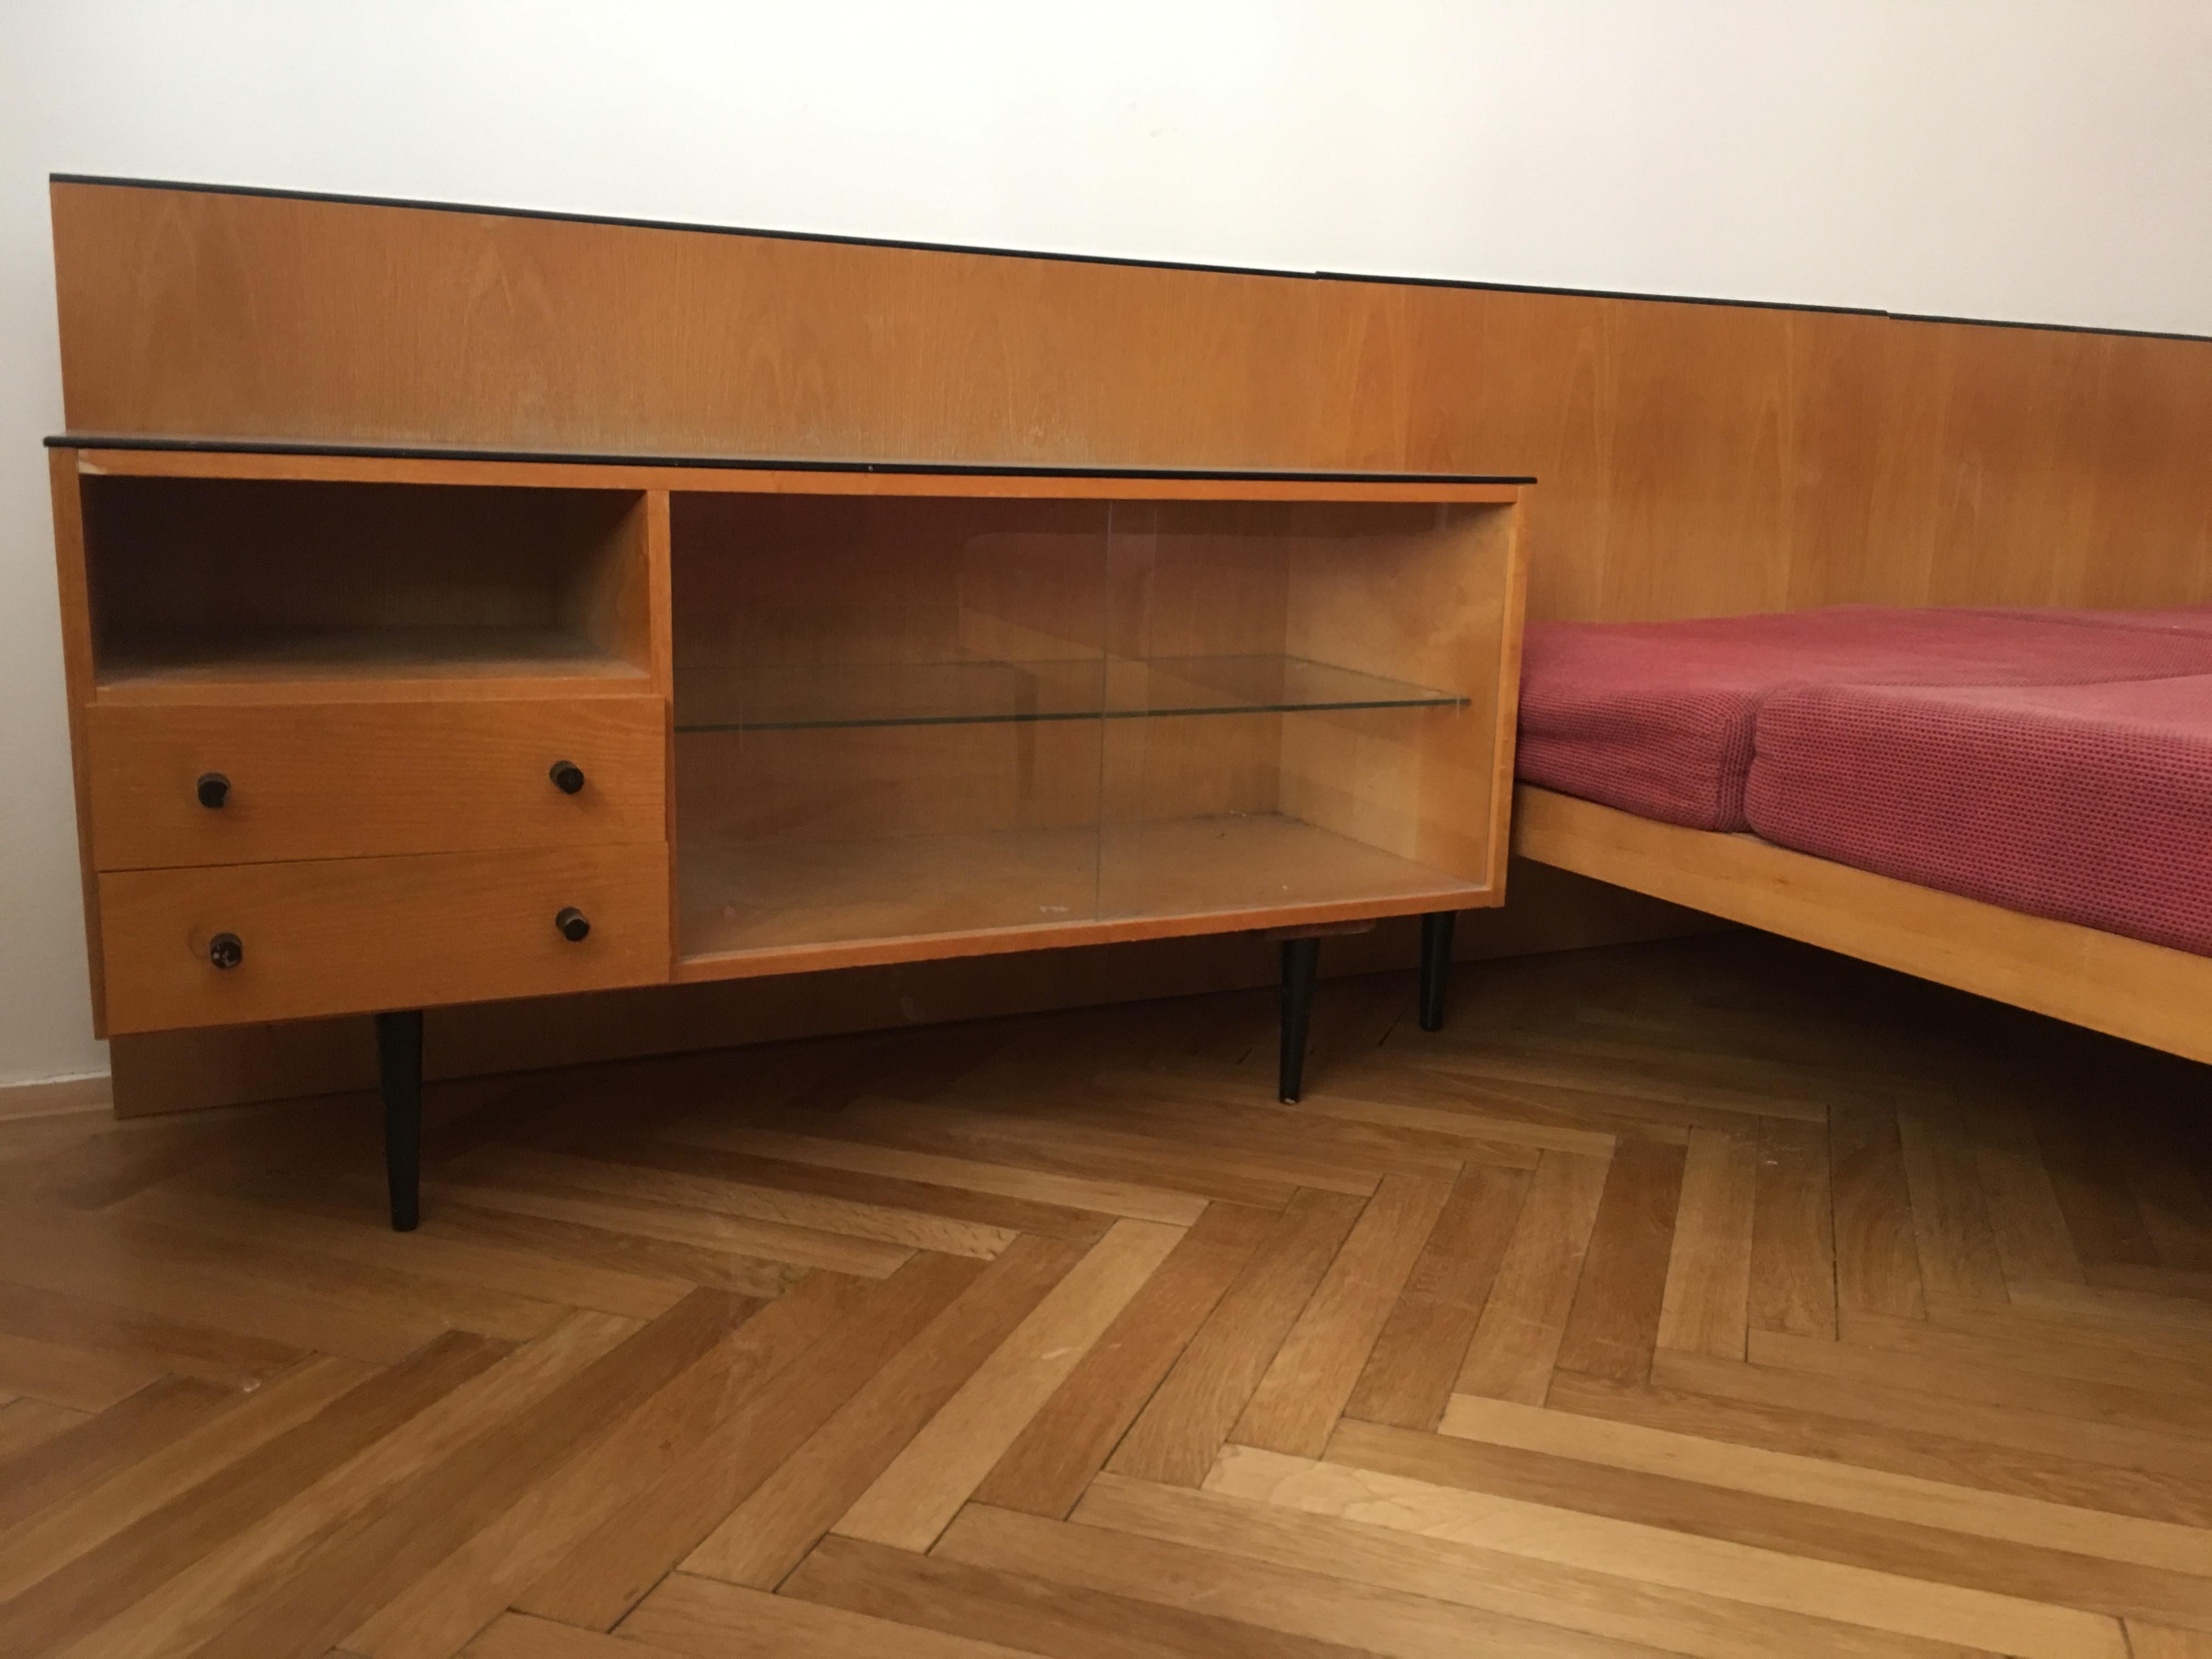 Double Bed with Nightstands by Mojmir Pozar for Up Zavody, 1960s (Moderne der Mitte des Jahrhunderts)